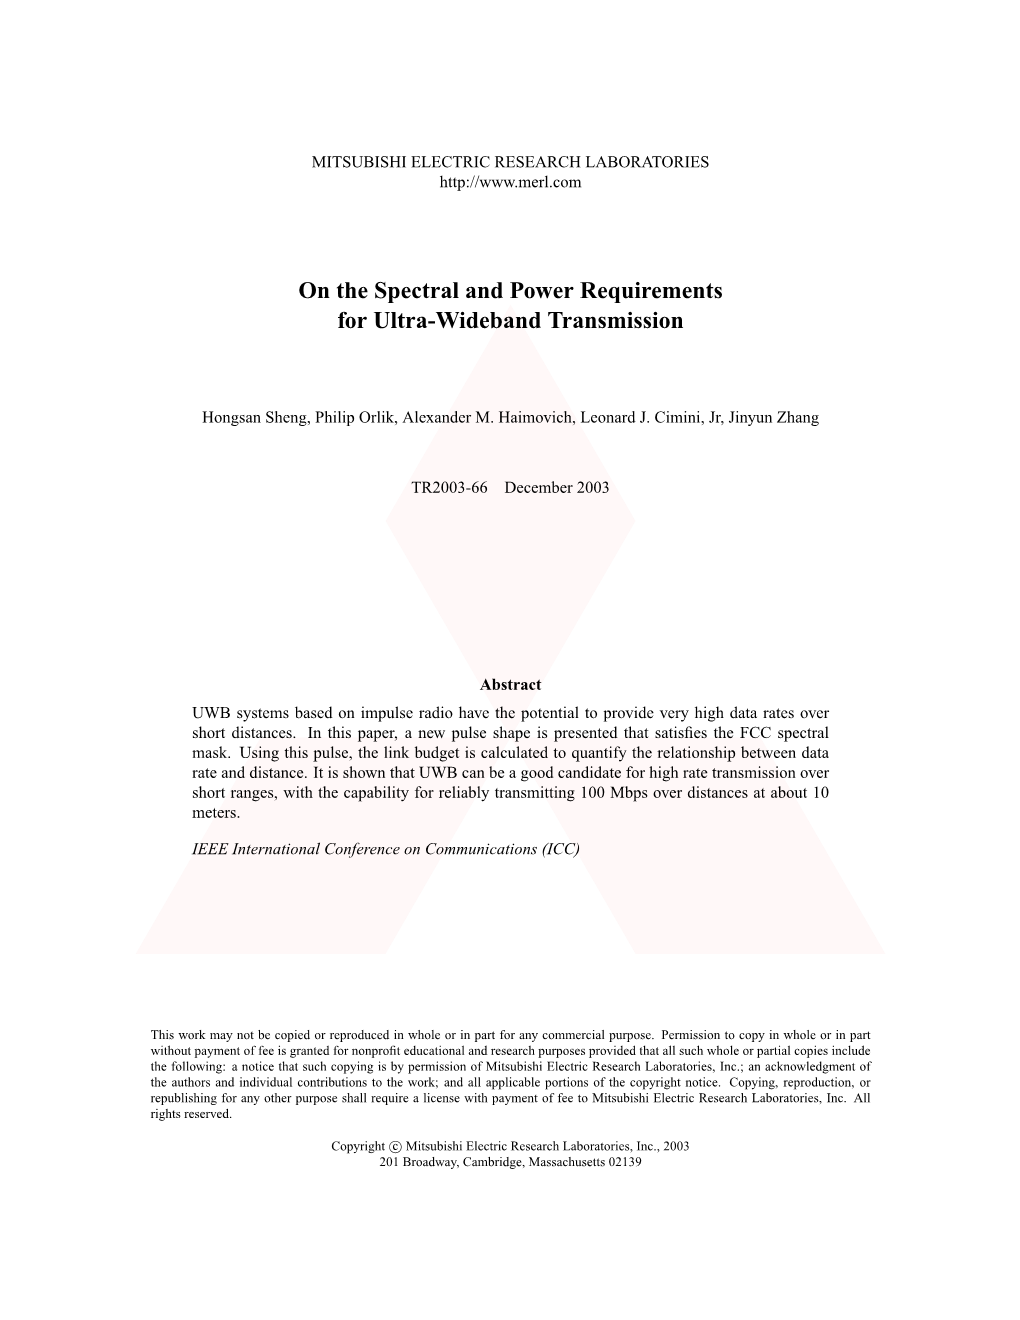 On the Spectral and Power Requirements for Ultra-Wideband Transmission